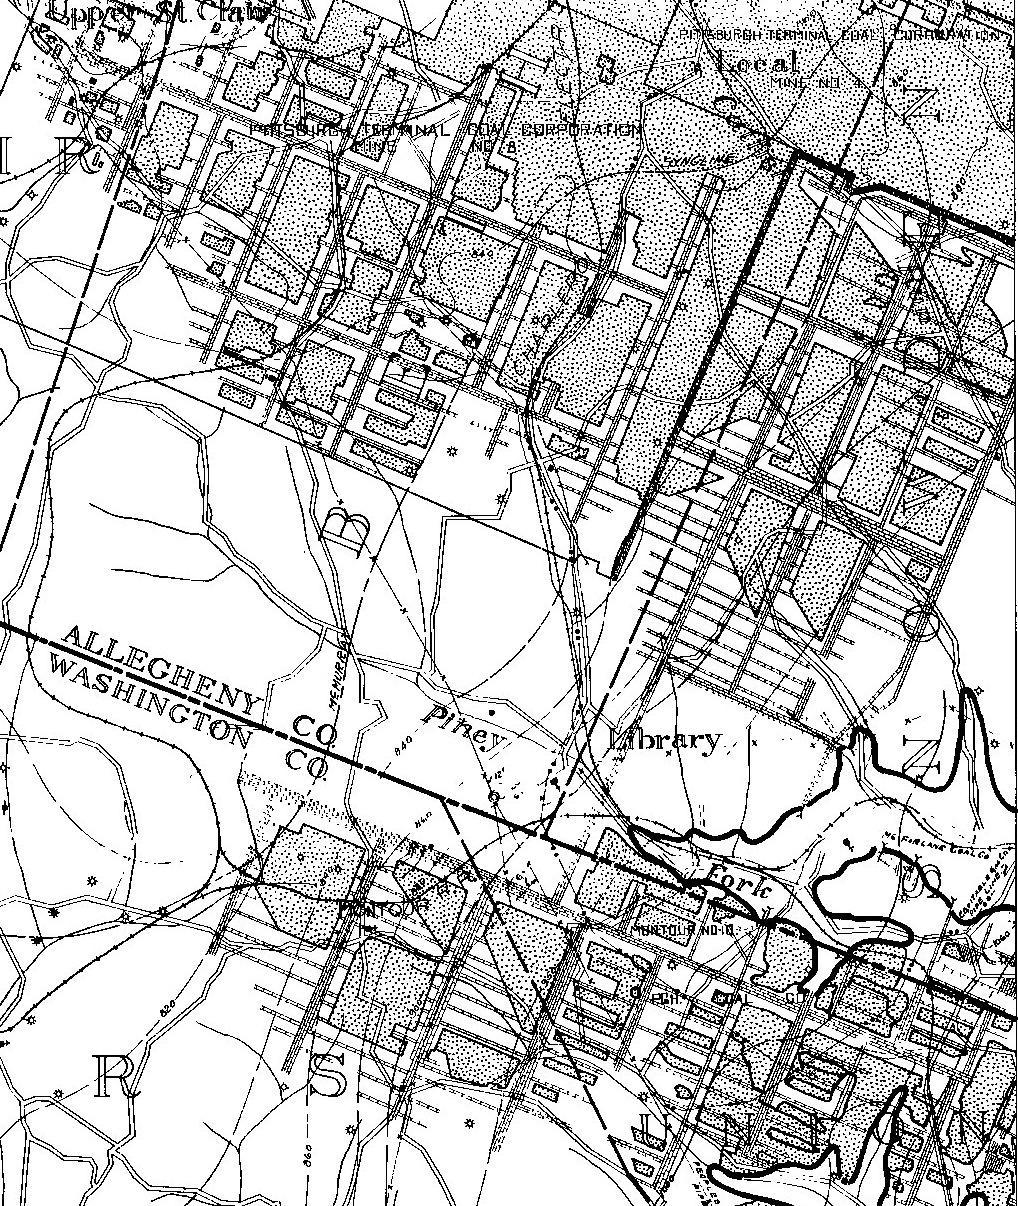 This larger map shows the northern section of Montour No. 10.